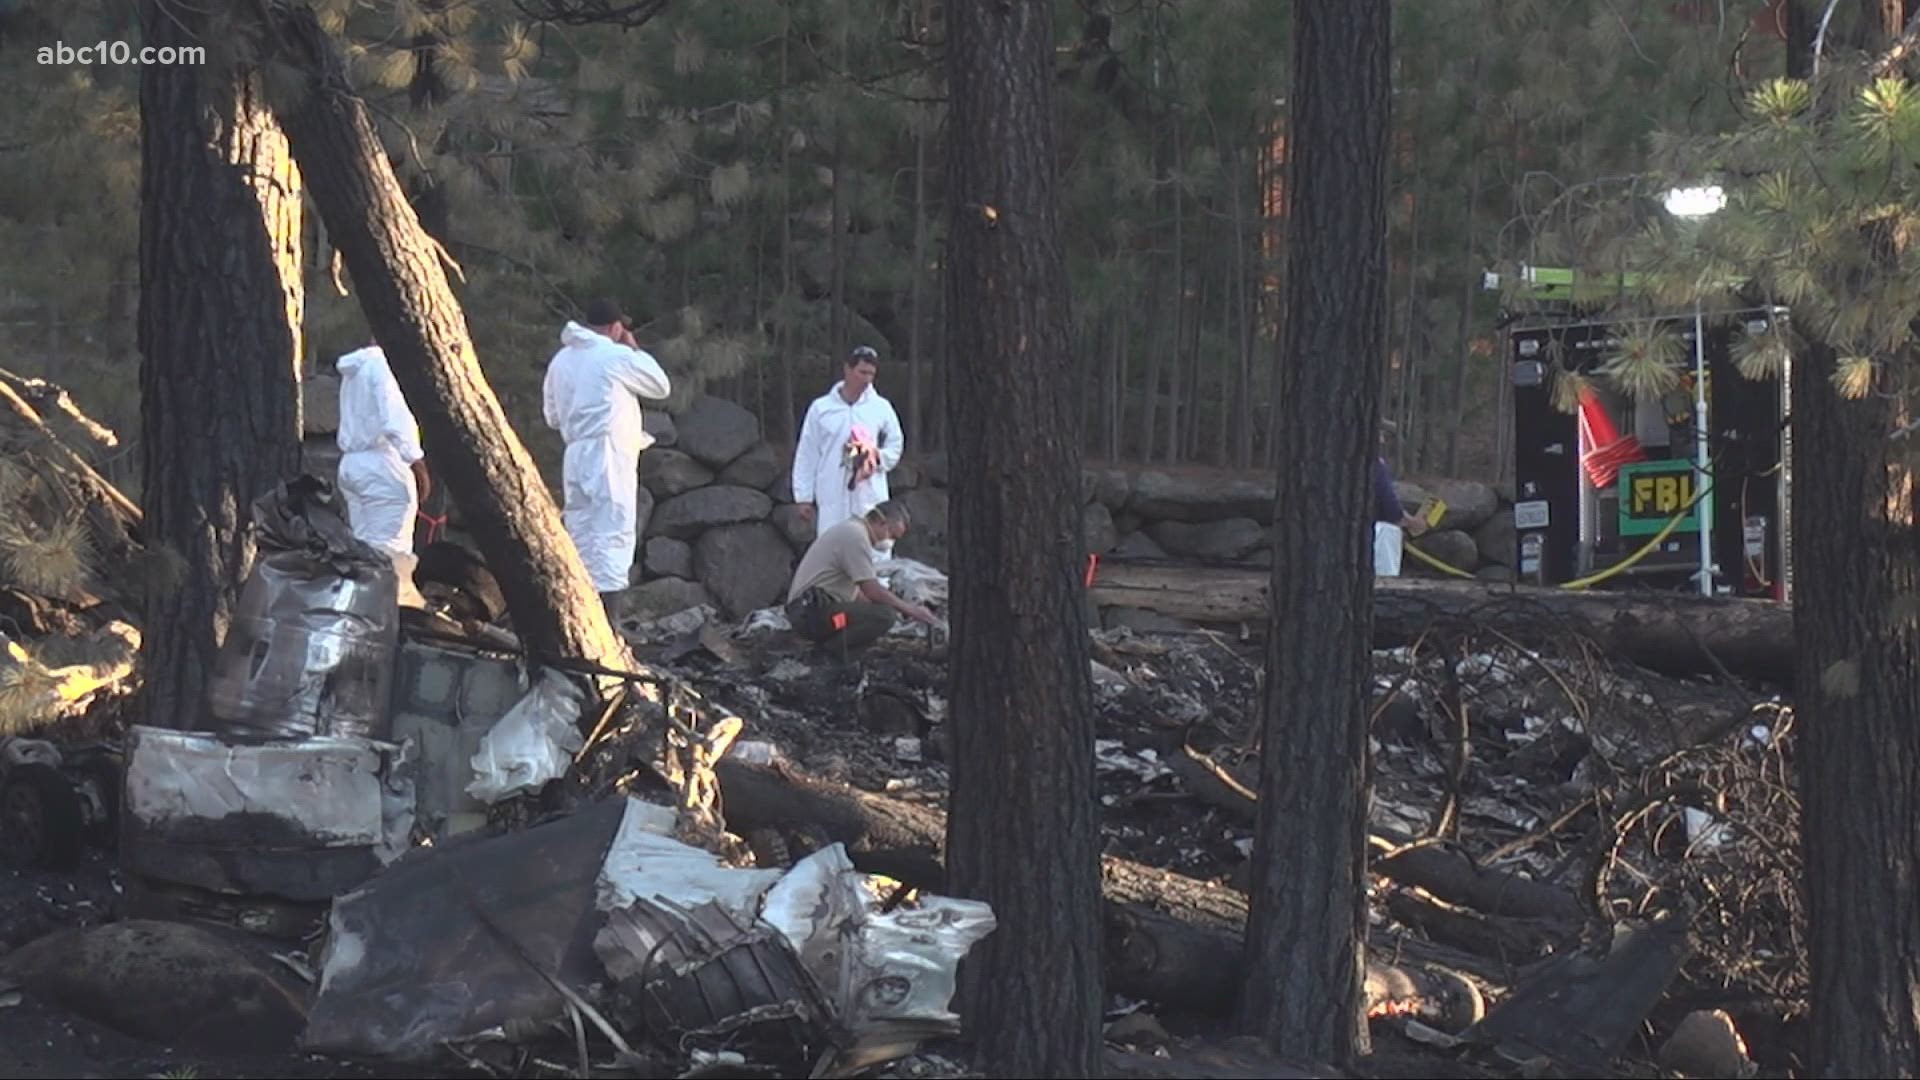 The death toll in a Truckee plane crash rises to 6 and the city of Tracy secures funding for it's first homeless shelter.